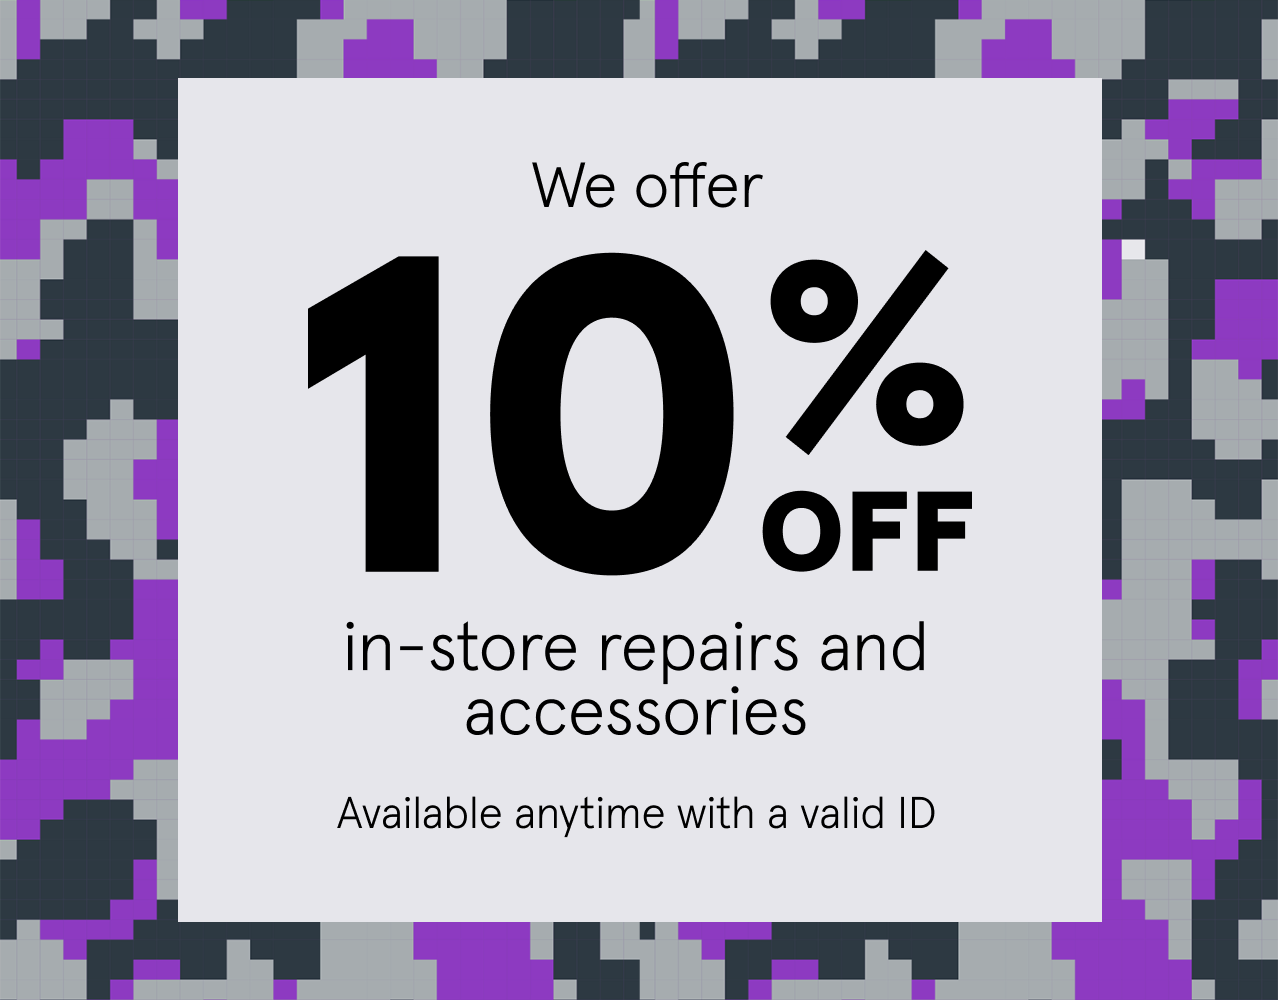 We offer 10% off in-store repairs and accessories, available anytime with a valid ID.